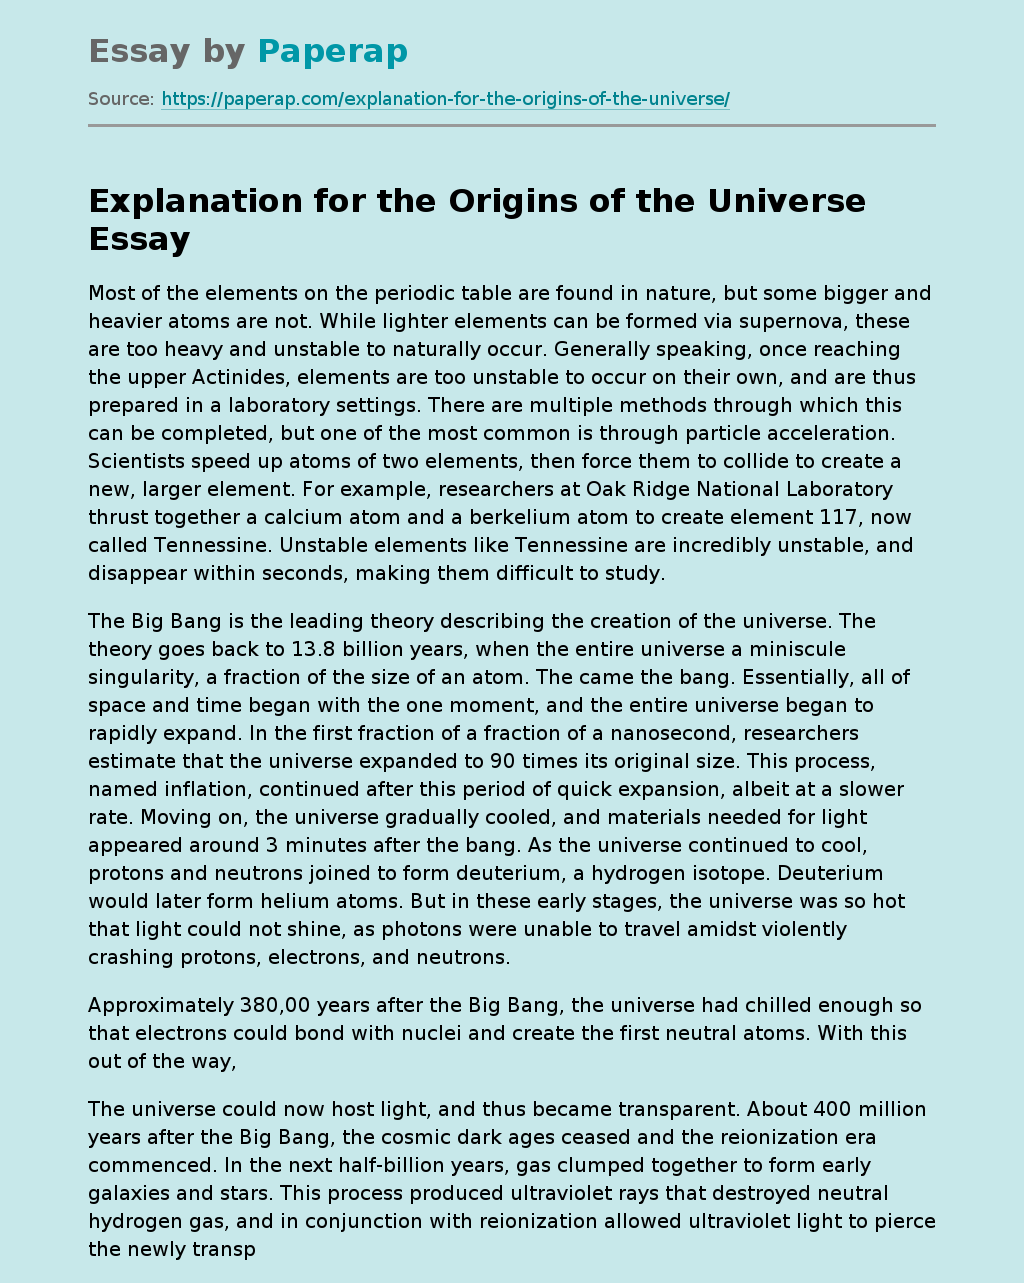 Explanation for the Origins of the Universe